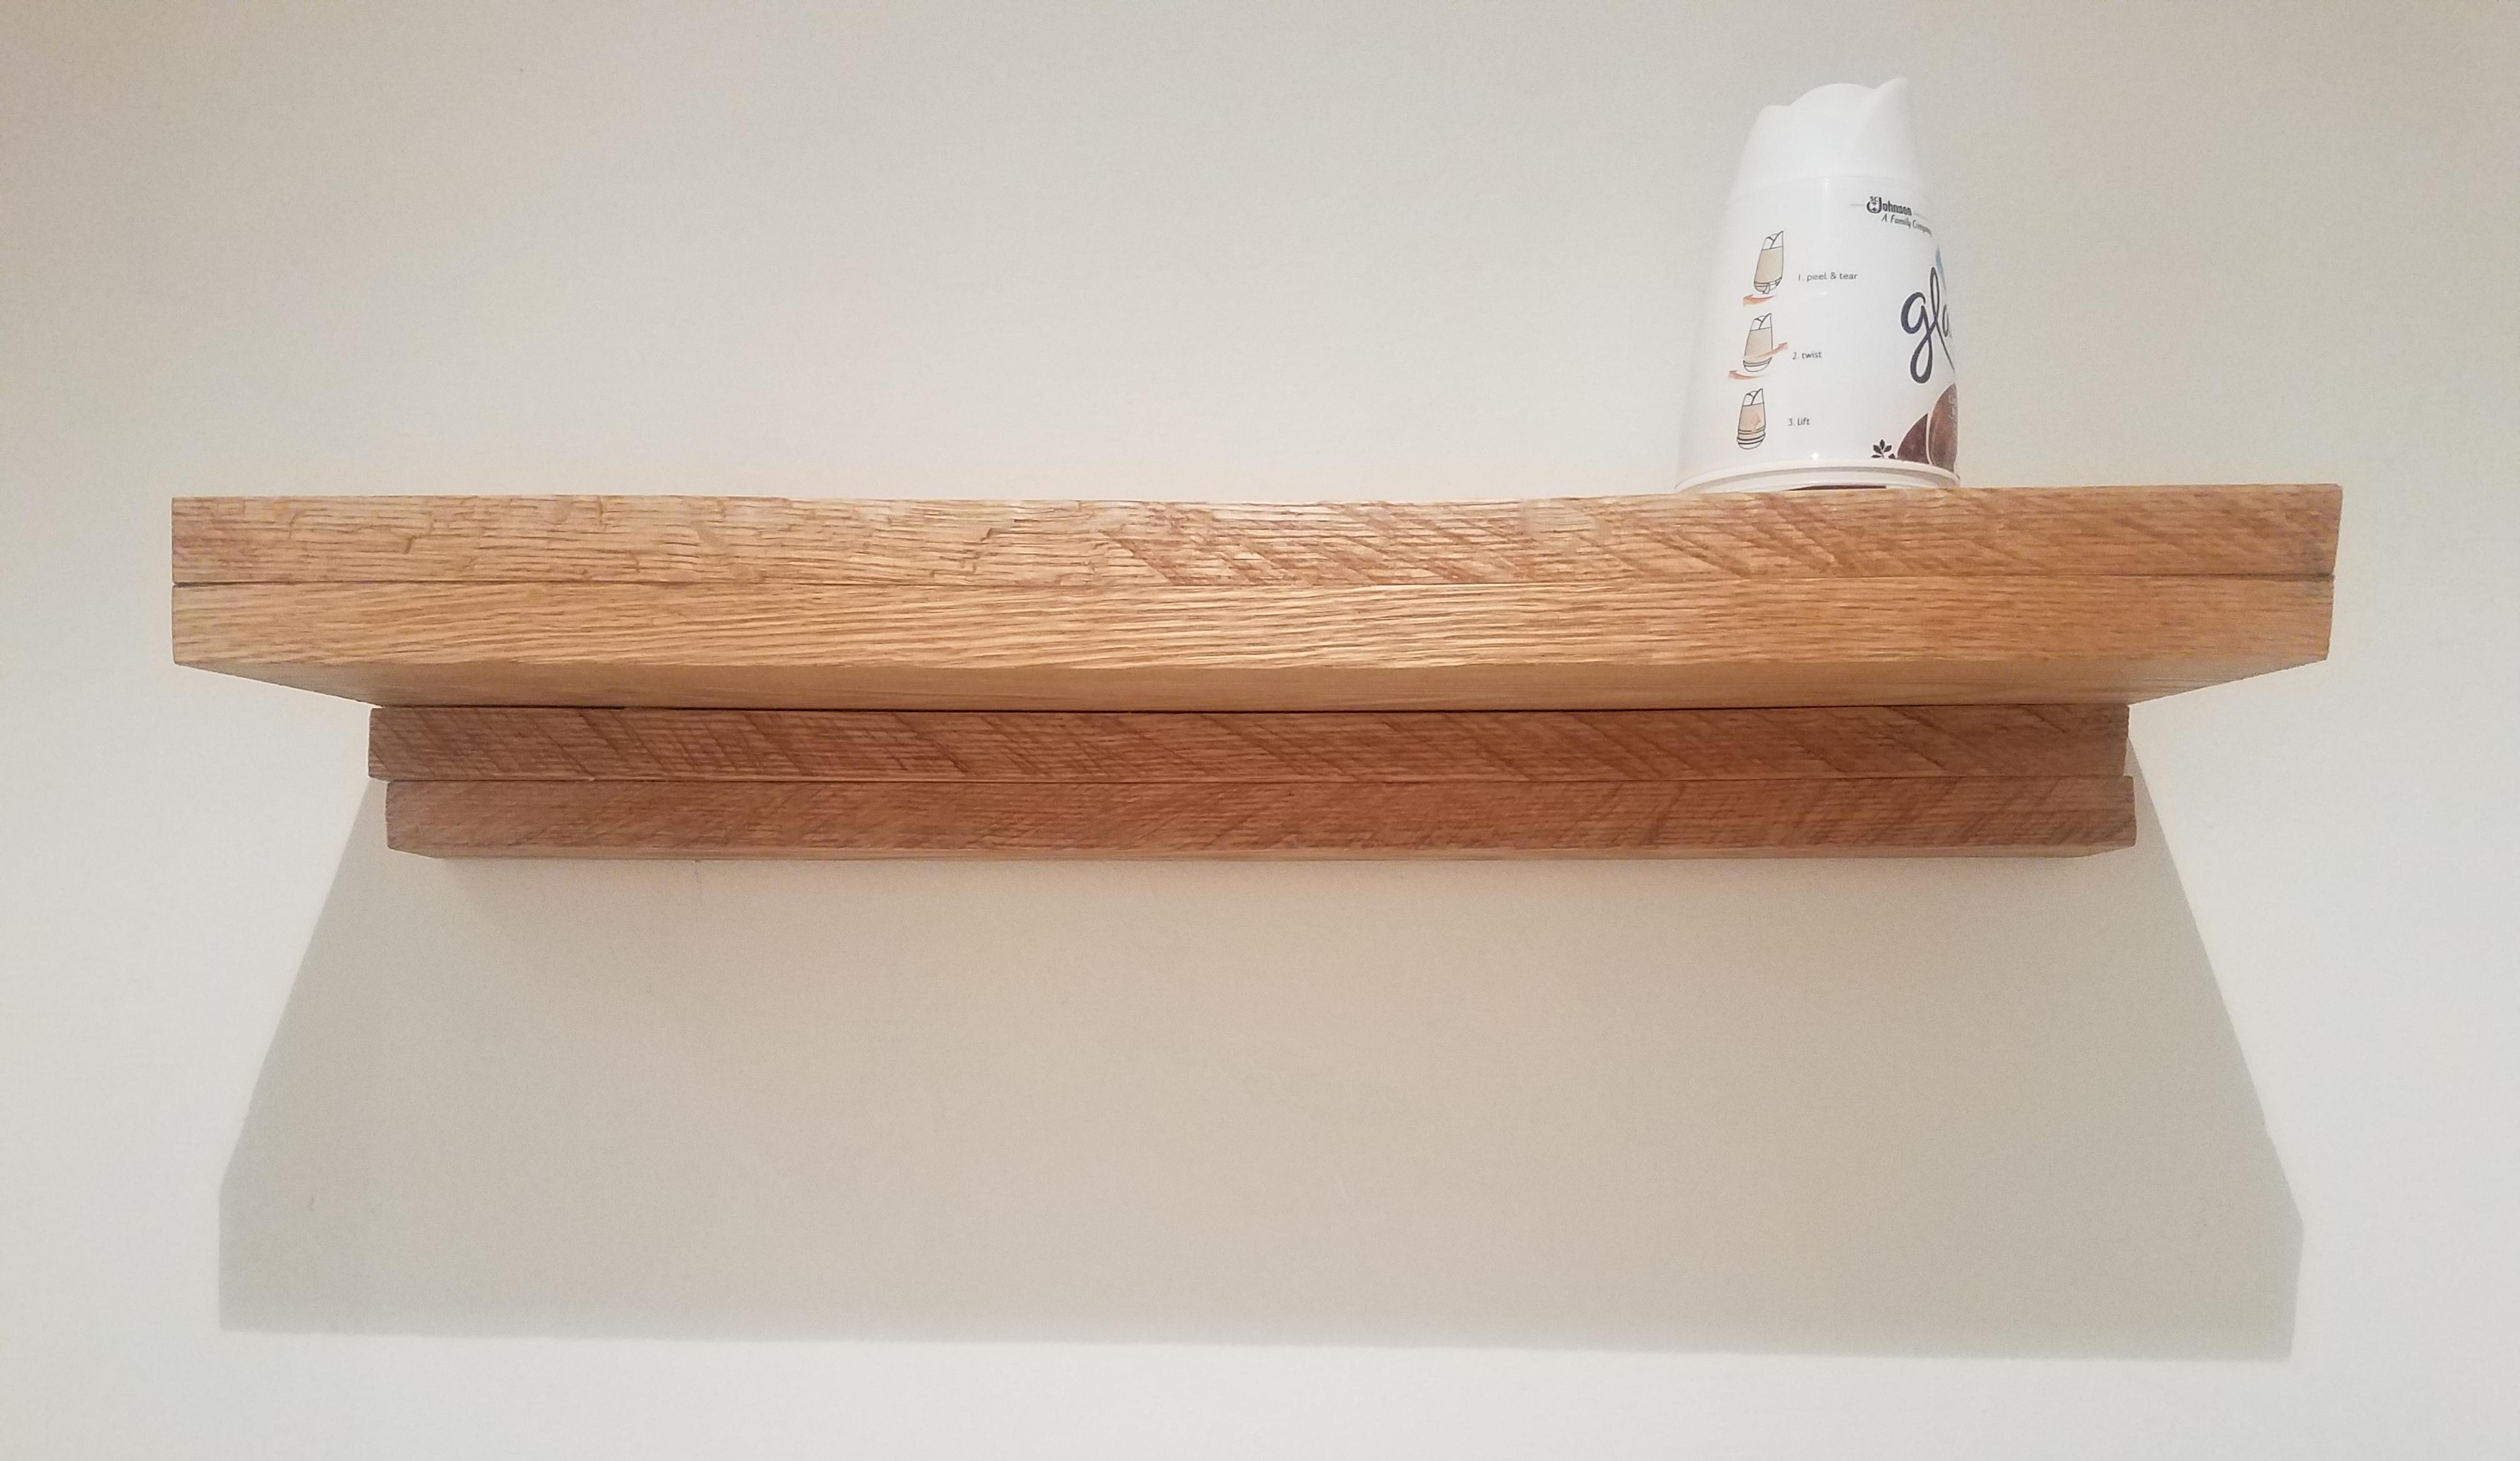 red oak floating shelf the first project wife has requested that for sky box actually completed ikea square bookshelf coat hanger wall hooks corner rack with shaped kitchen aisle